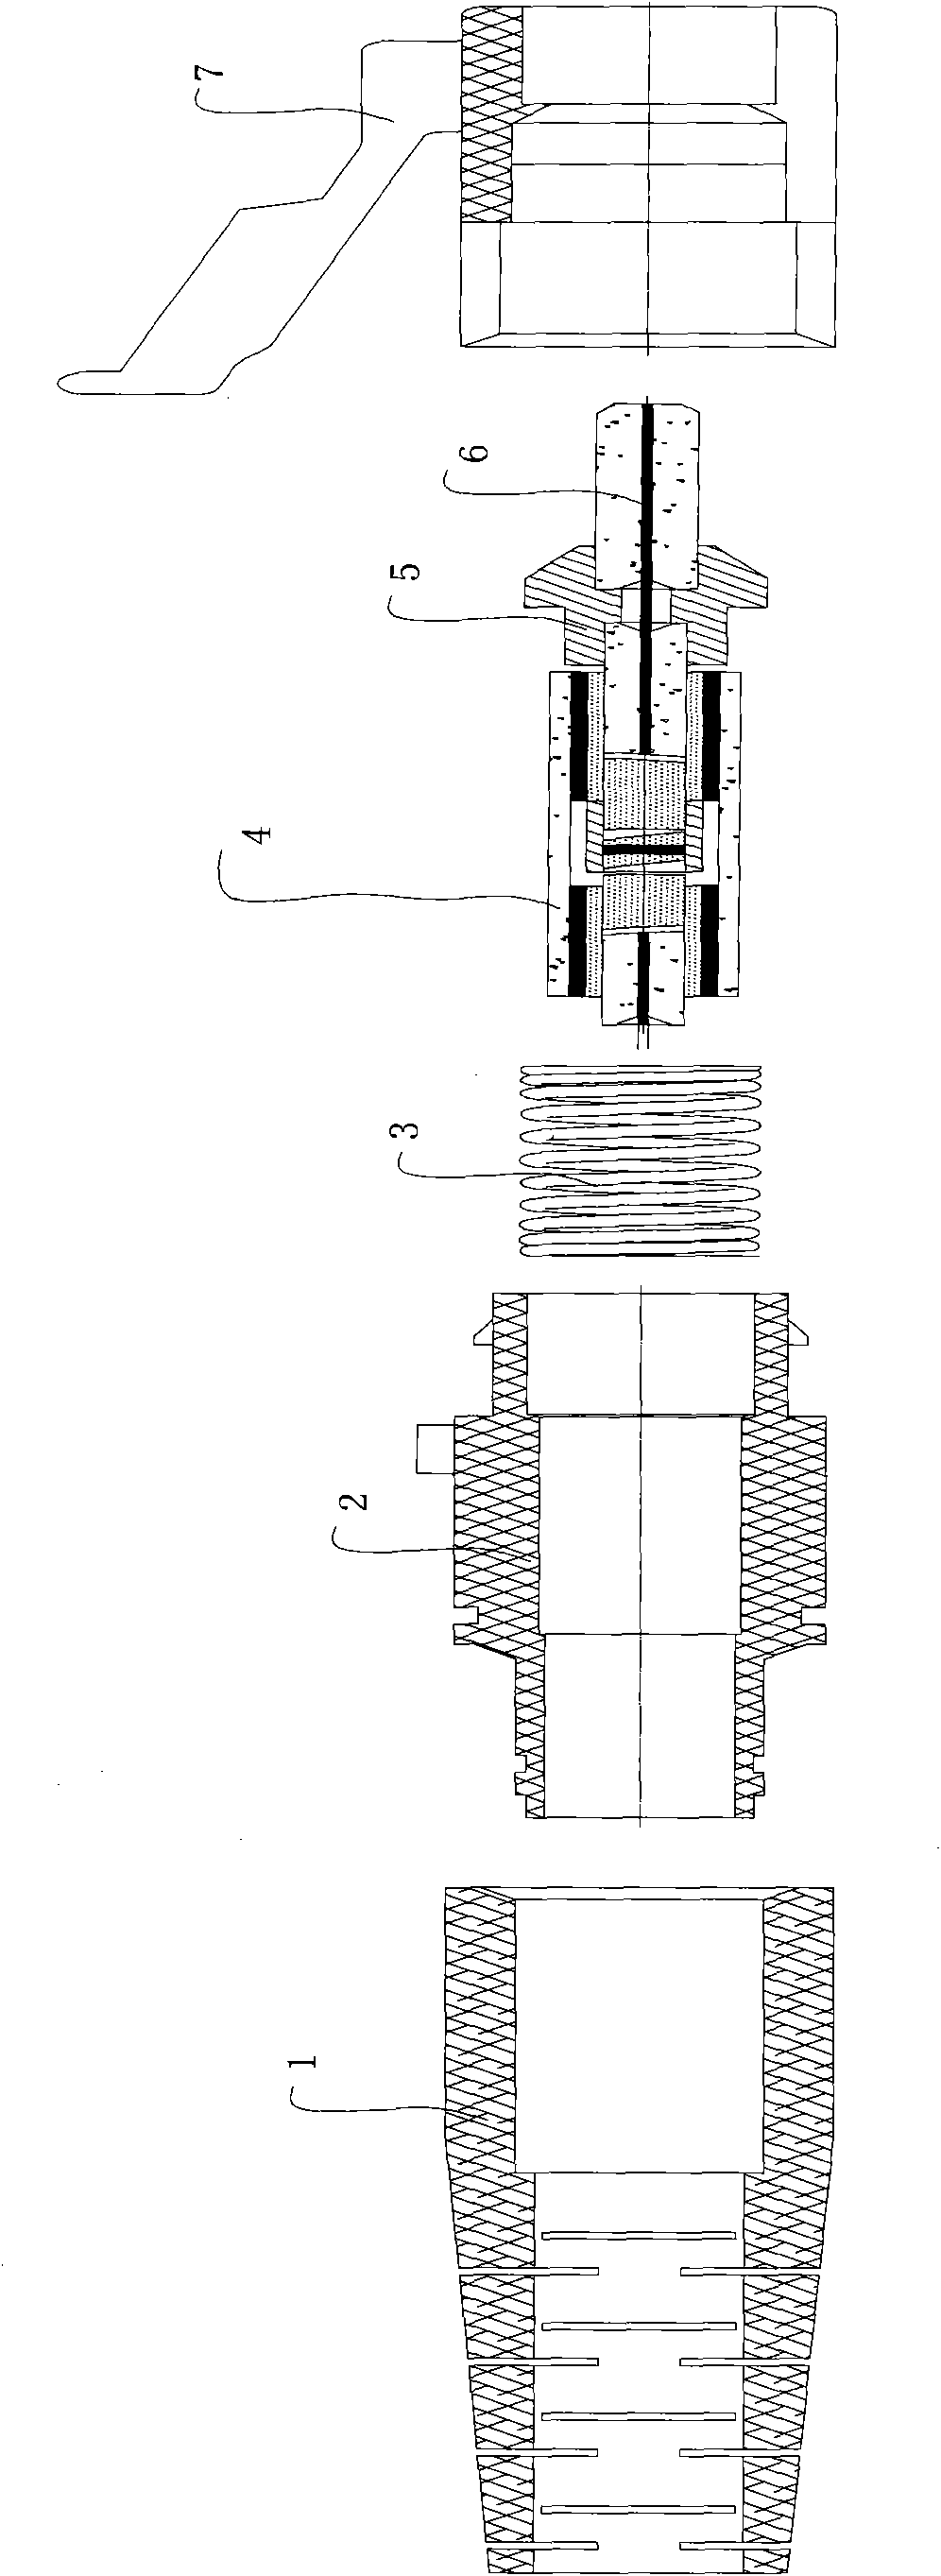 Subminiature optical fiber connector with isolator